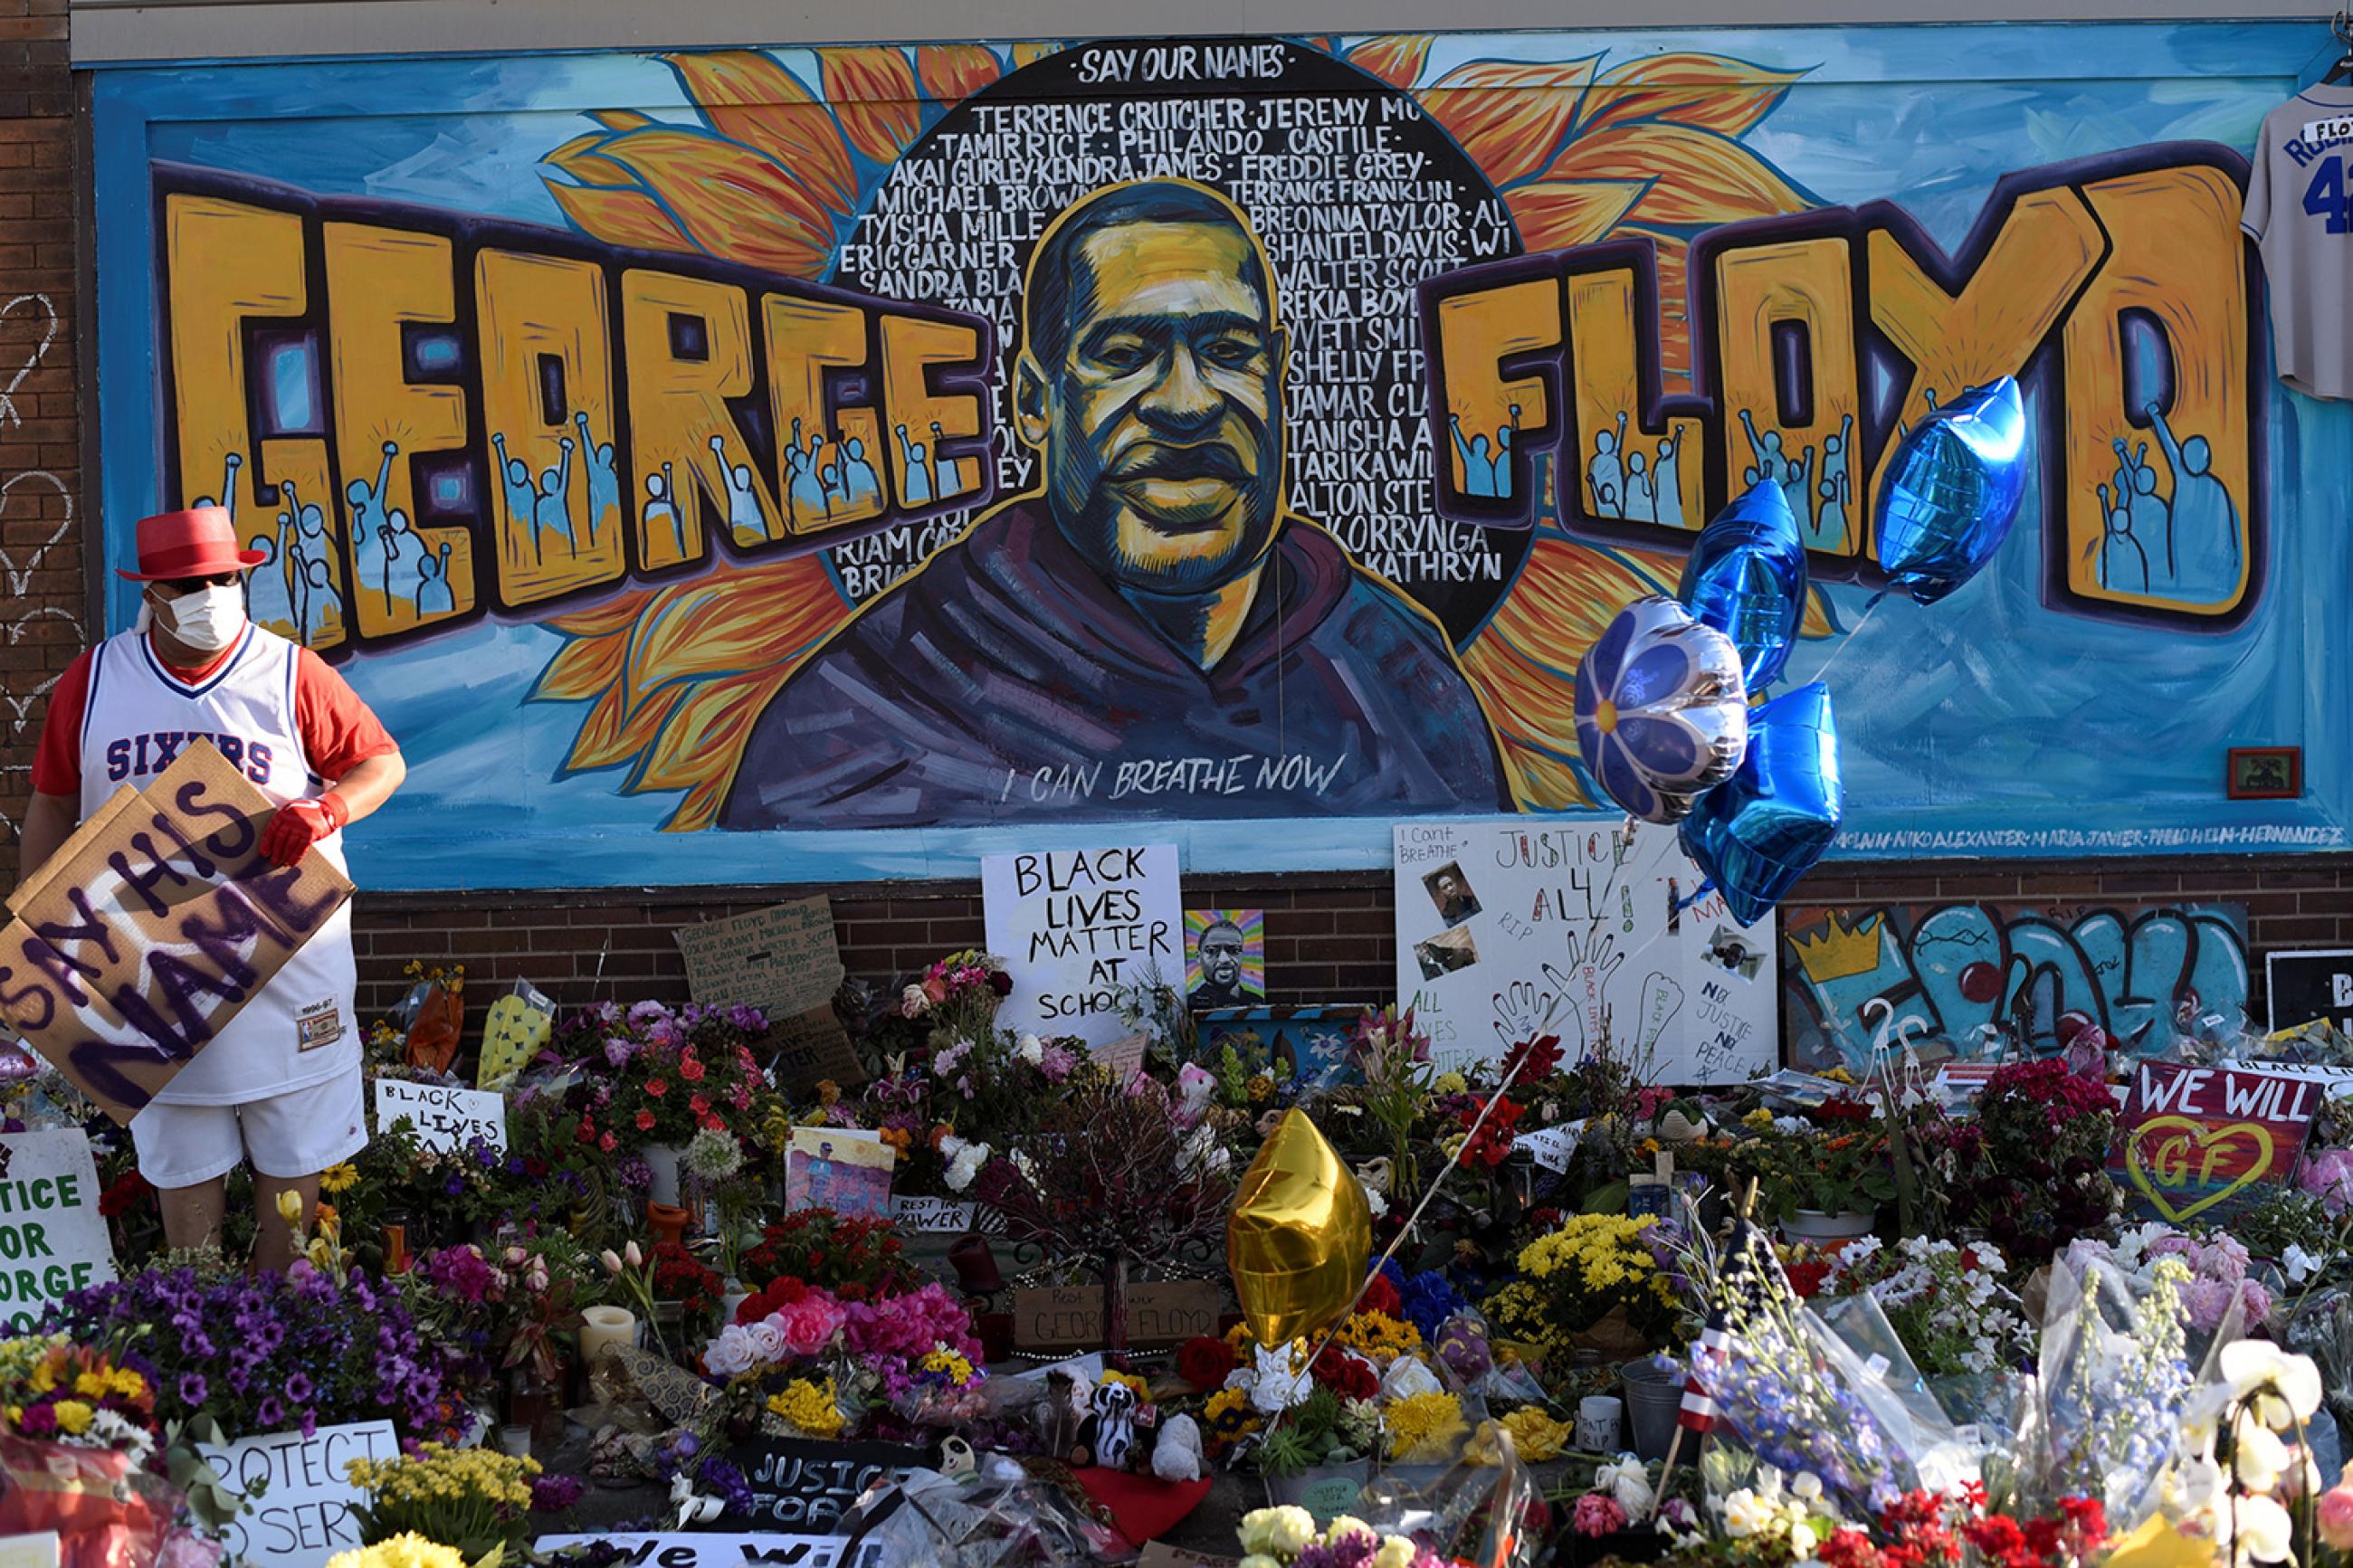 General view of George Floyd's memorial site on June 4, 2020 following more than a week of nationwide protests in Minneapolis, Minnesota. The photo shows a mural to Floyd with lots of flowers and signs laid out in front. REUTERS/Nicholas Pfosi